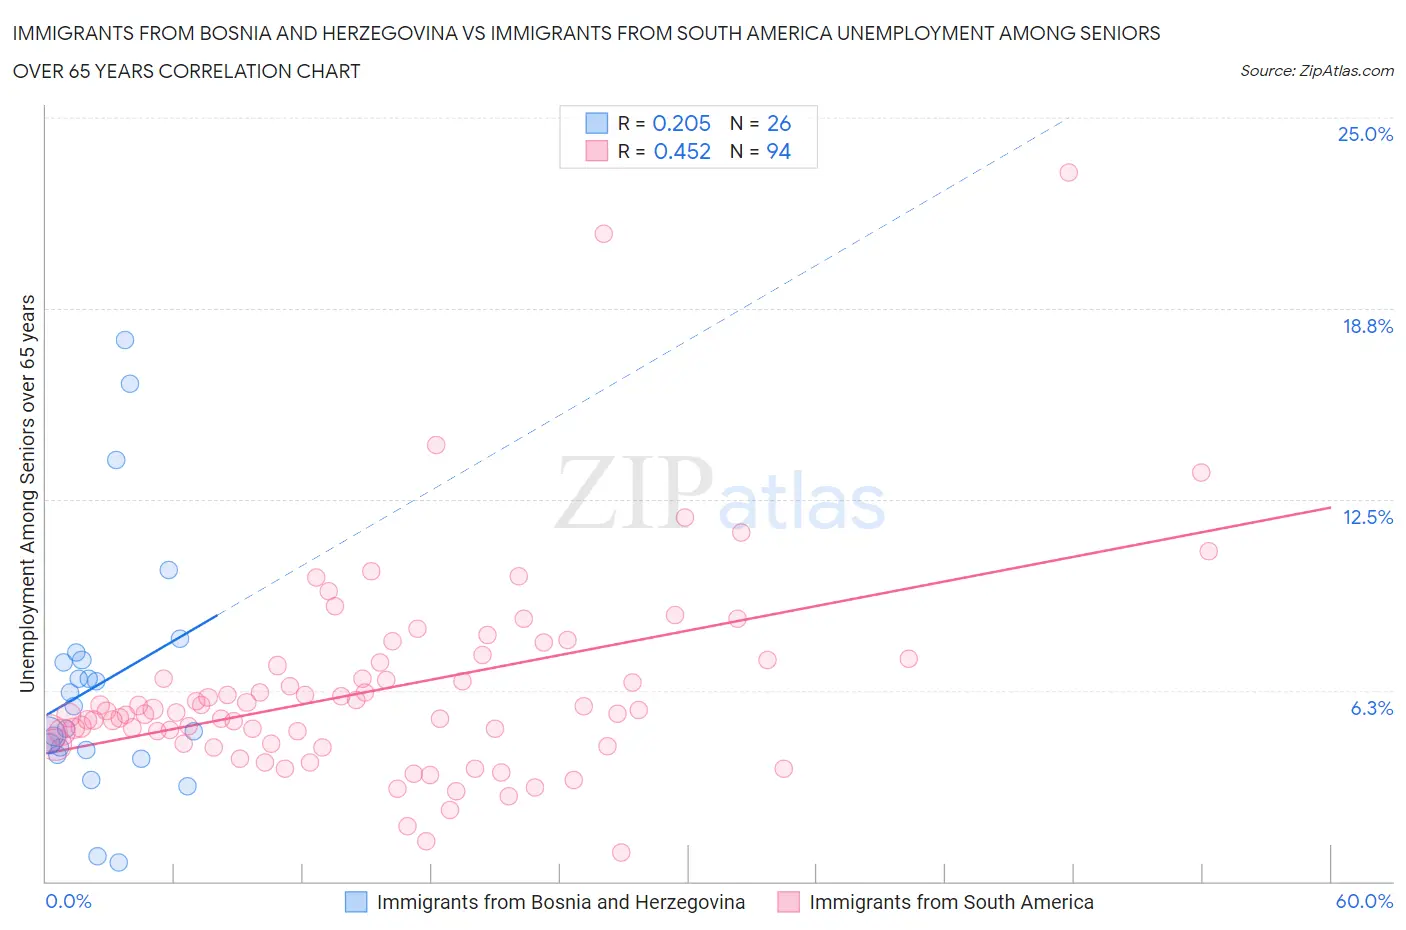 Immigrants from Bosnia and Herzegovina vs Immigrants from South America Unemployment Among Seniors over 65 years